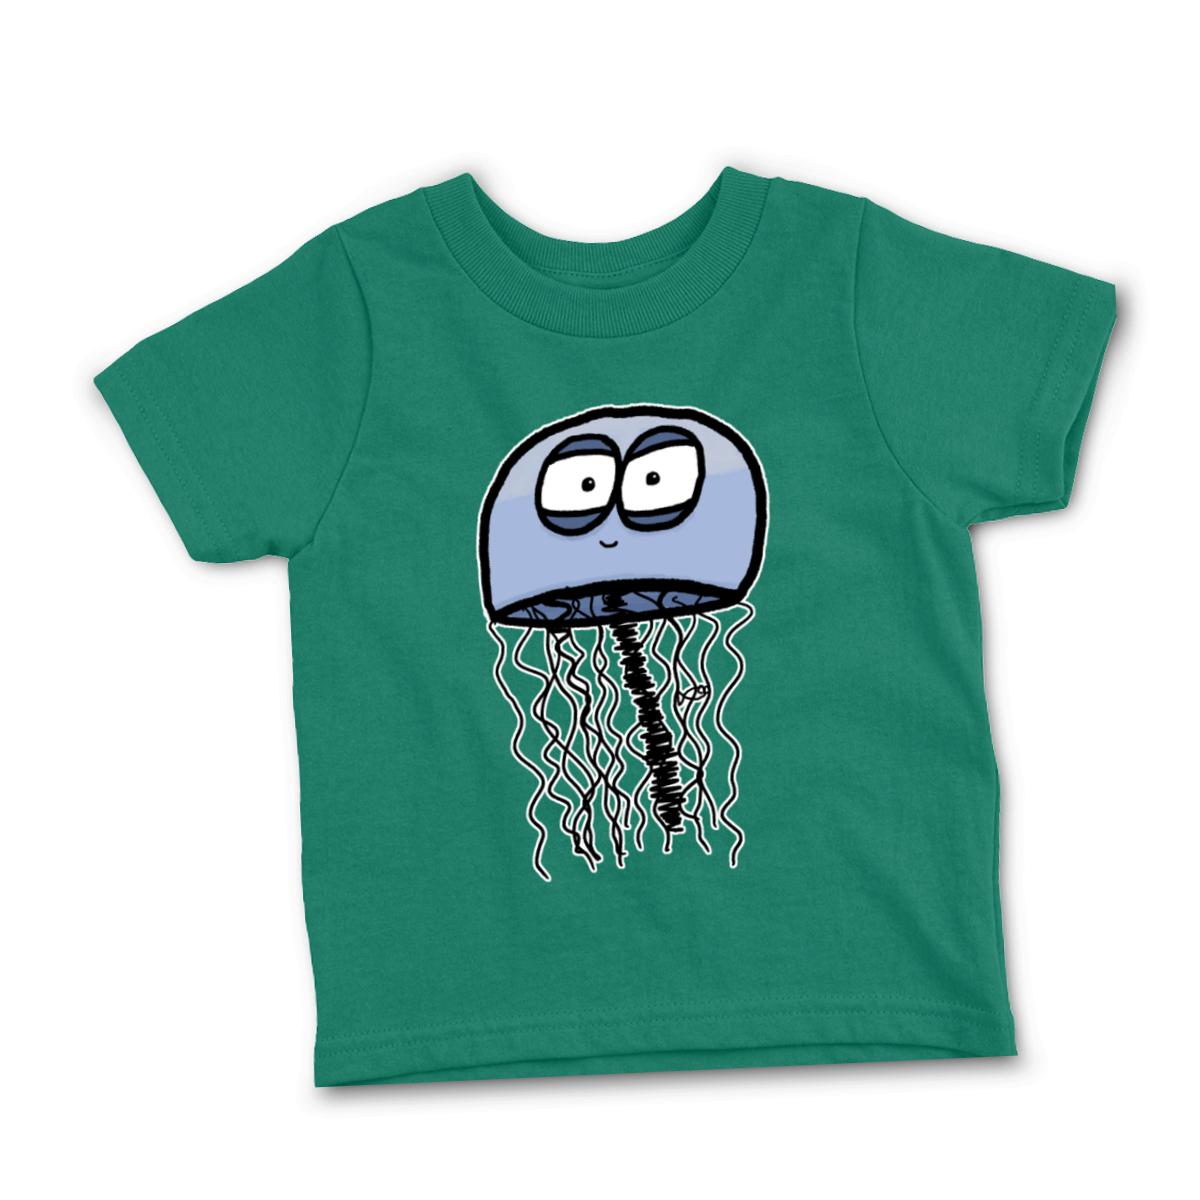 Jelly Fish Toddler Tee 56T kelly